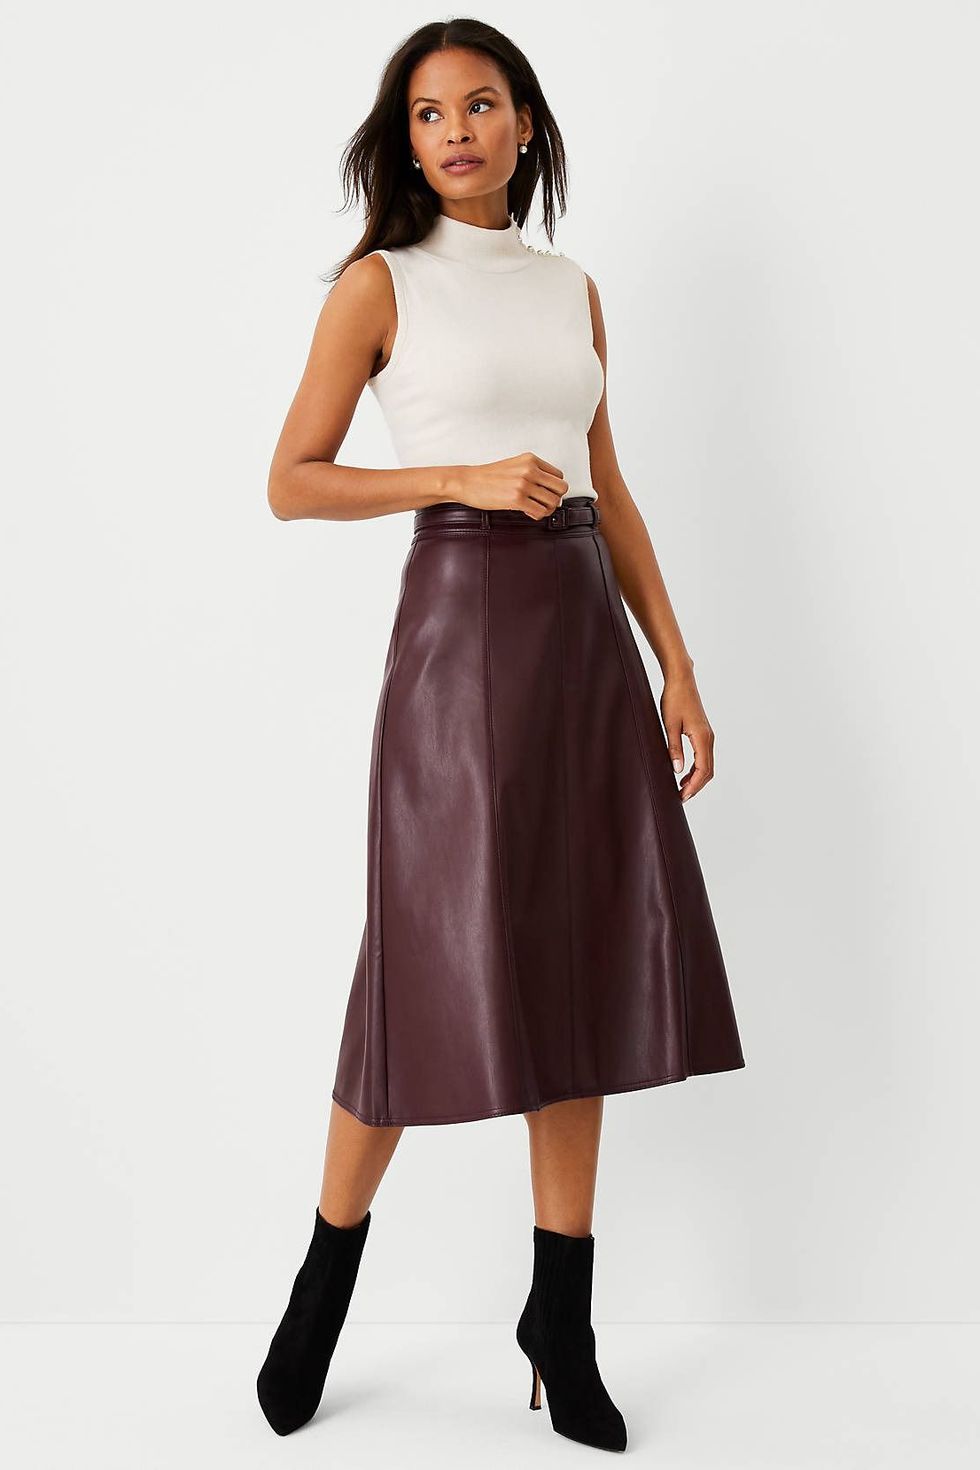 Ultimate Guide to 2023 Leather Skirt Fashion Trends